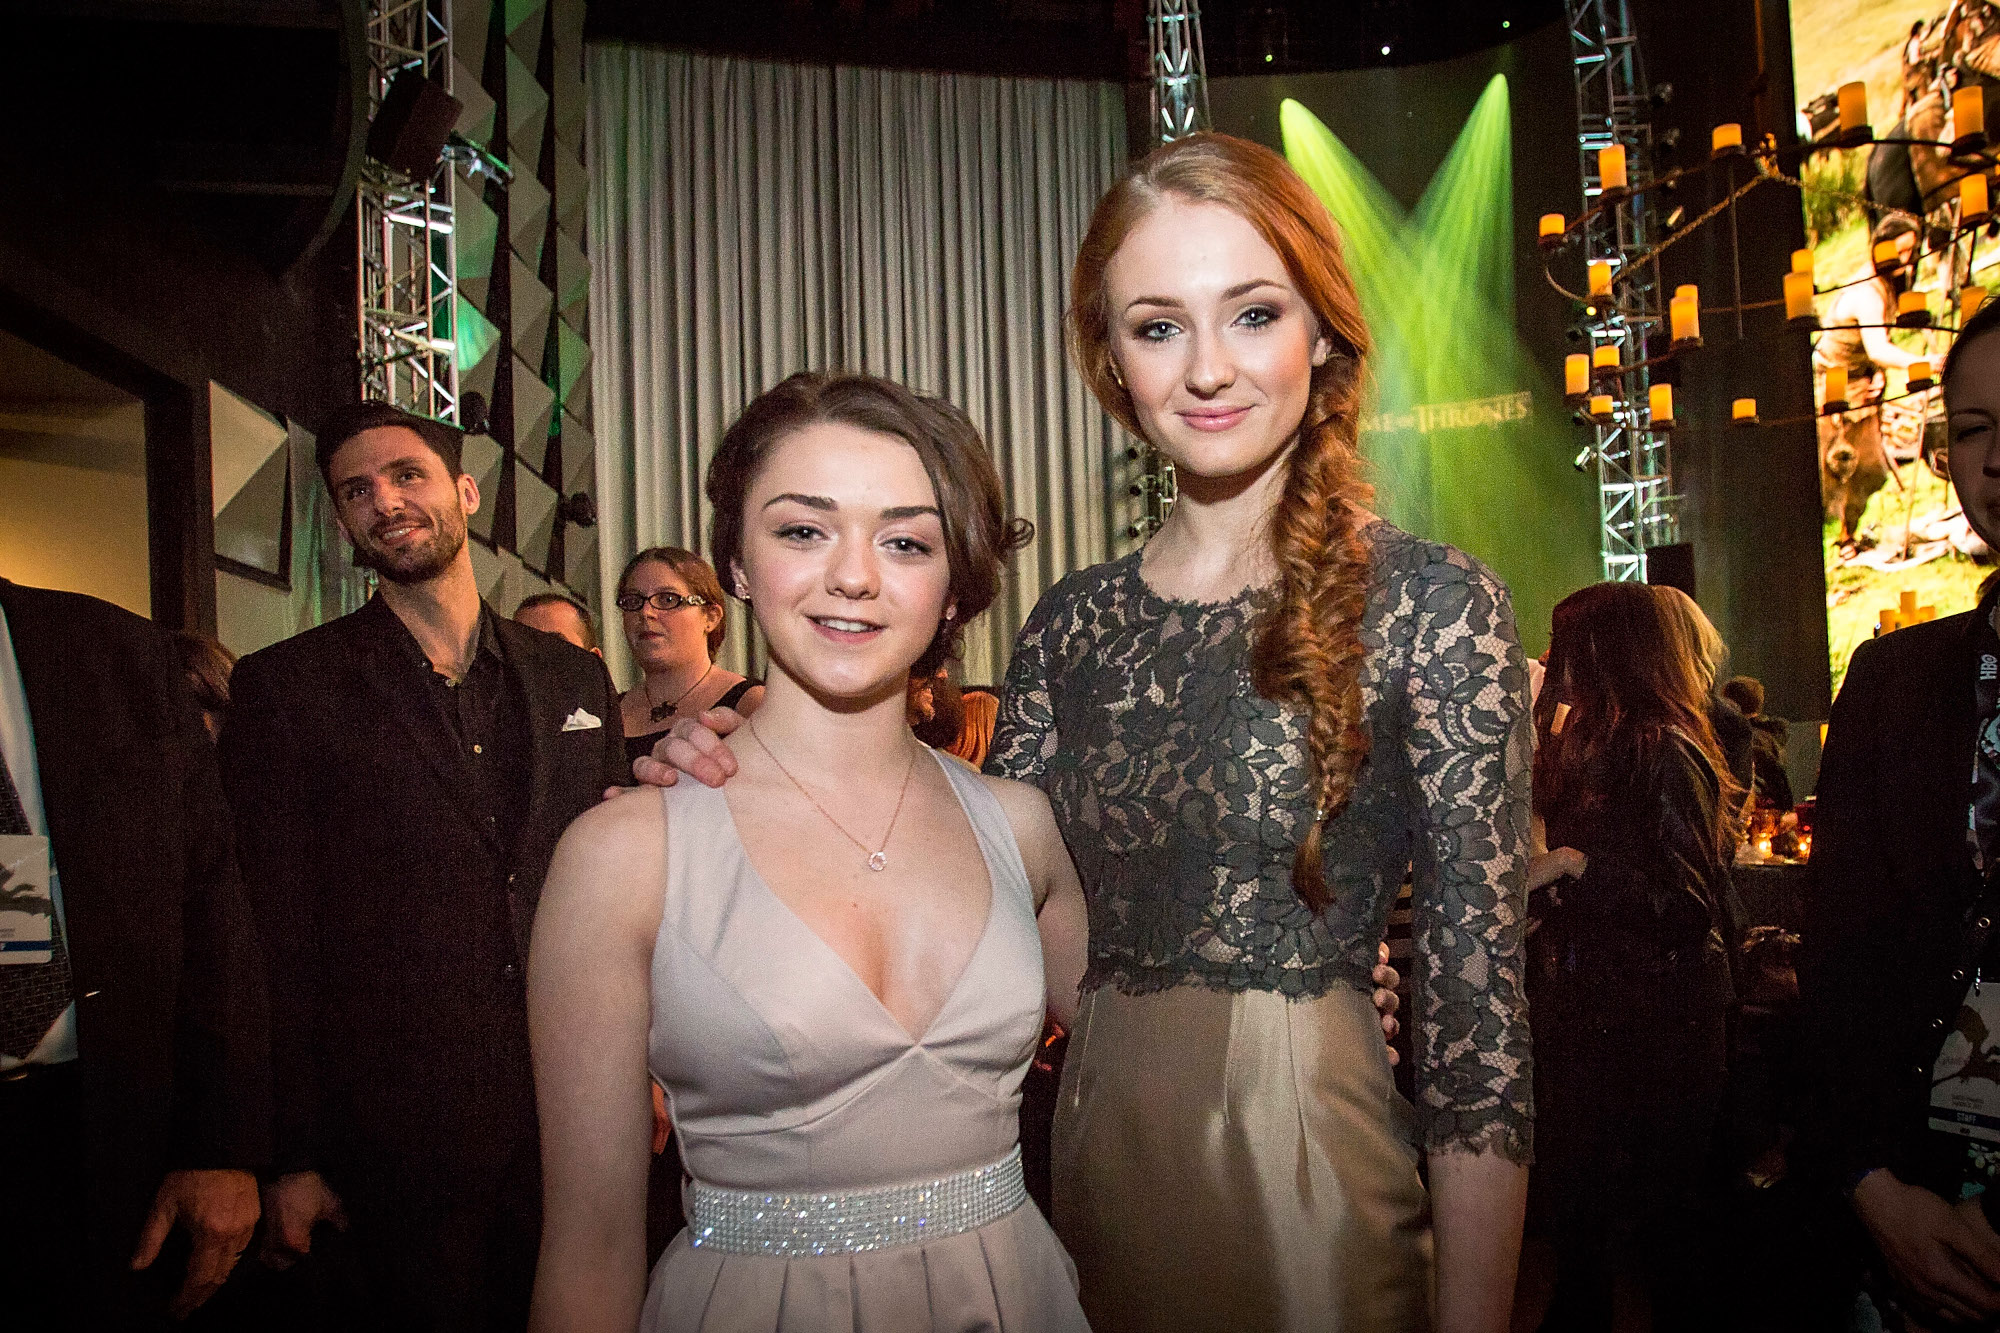 Game of Thrones stars Maisie Williams and Sophie Turner stand side by side. Williams wears a beige dress and Turner wears a lacy top and gold skirt